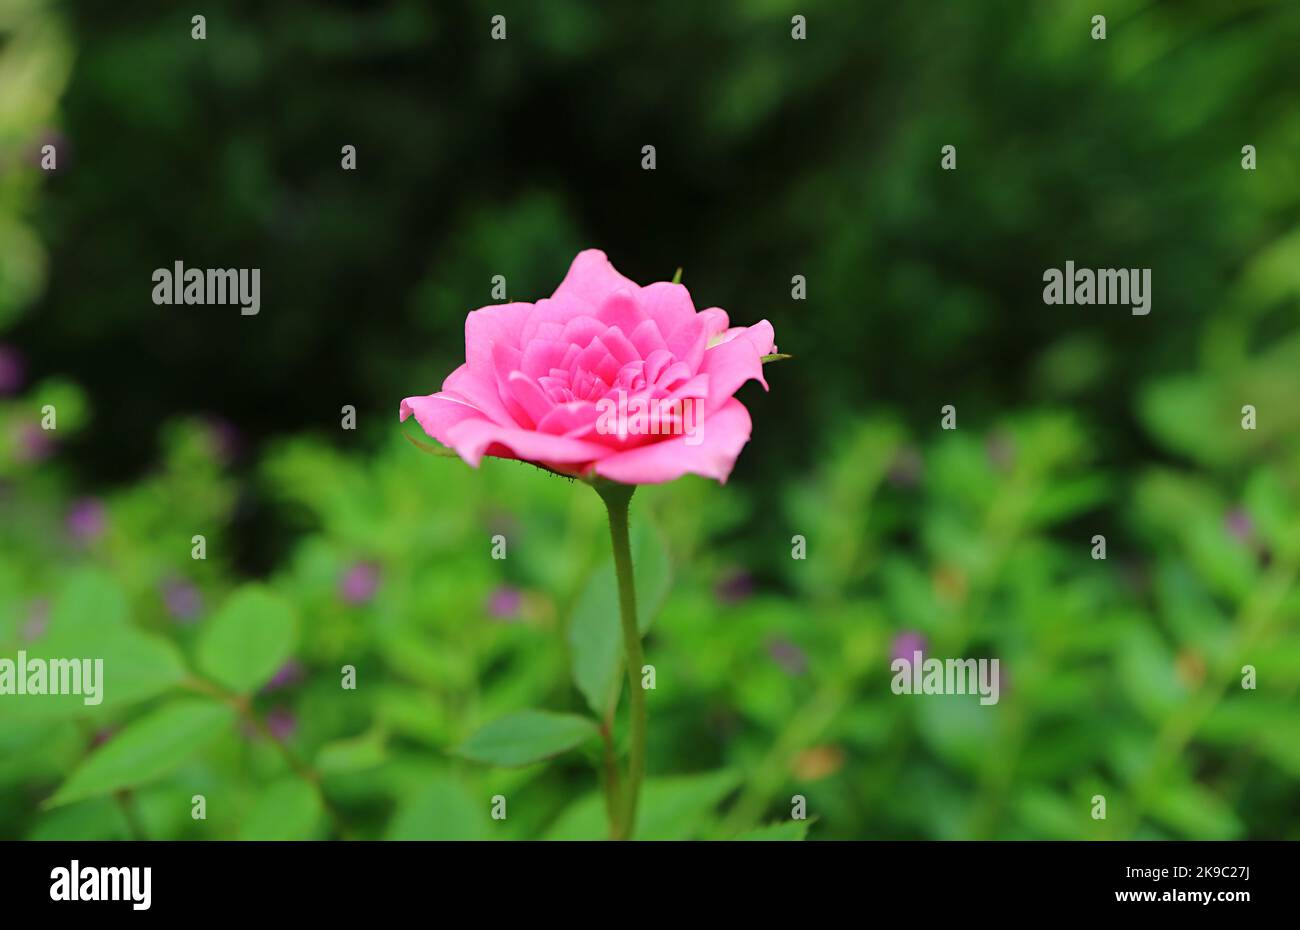 Closeup of a Beautiful Cerise Pink Bourbon Rose Blooming in the Garden Stock Photo